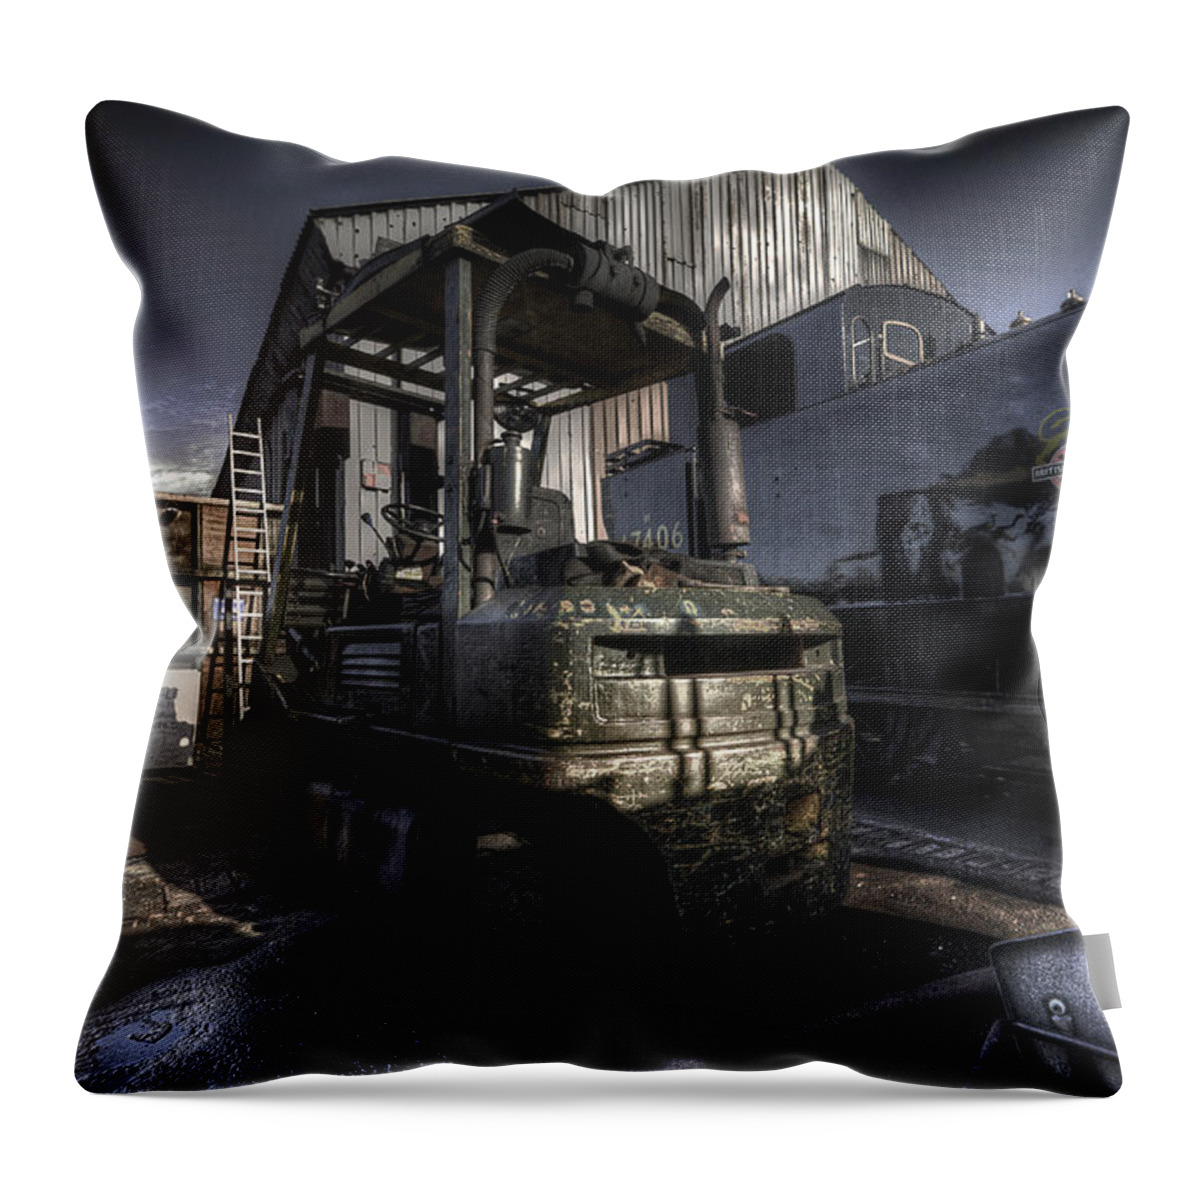 Art Throw Pillow featuring the photograph Forklift by Yhun Suarez